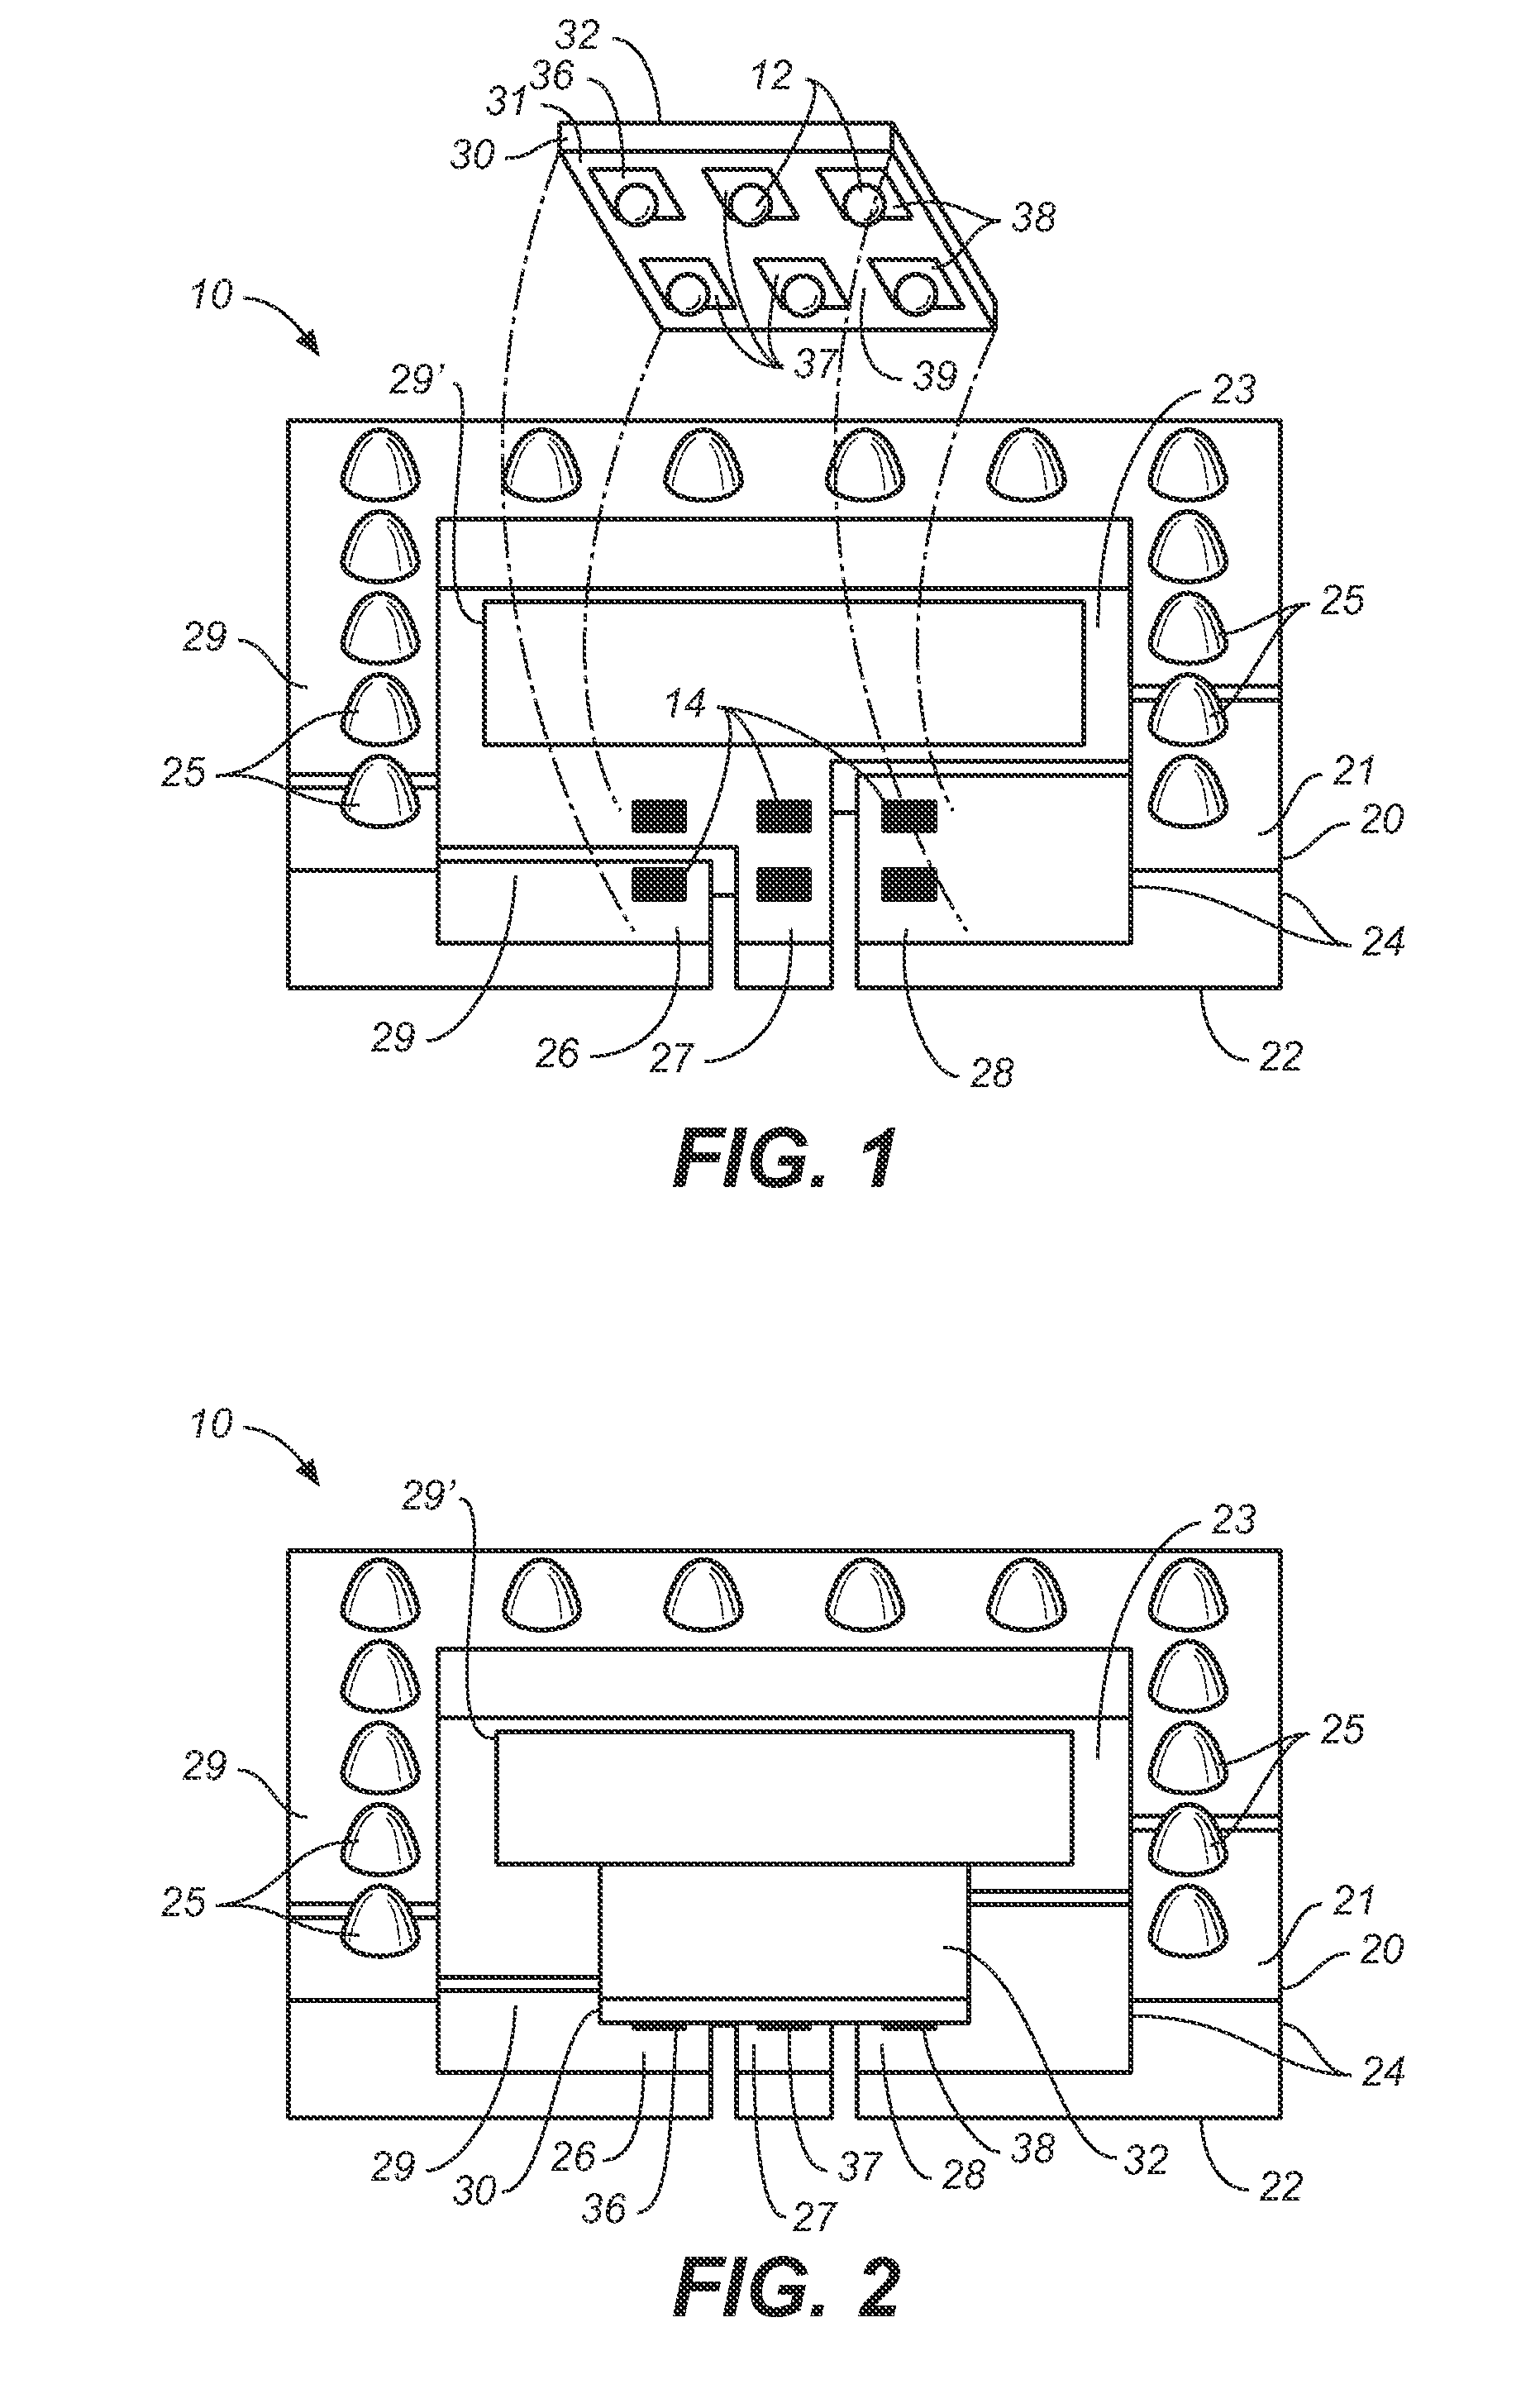 Semiconductor Die Packages Having Overlapping Dice, System Using the Same, and Methods of Making the Same